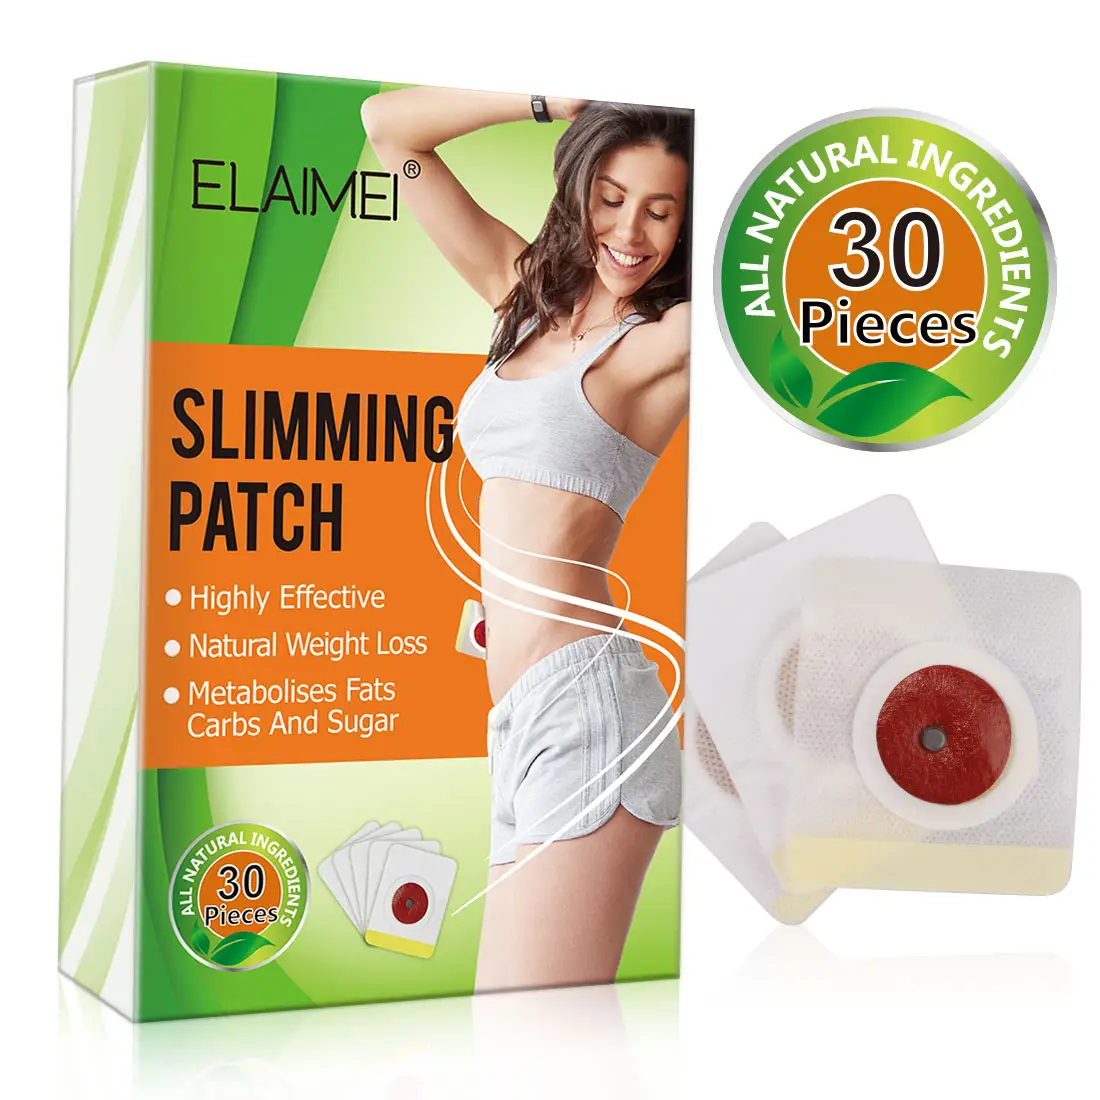 30Pcs Slimming Patch Losing Weight Slimming Product Body Belly Waist Cellulite Fat Burner Slim Weight Loss Sticker